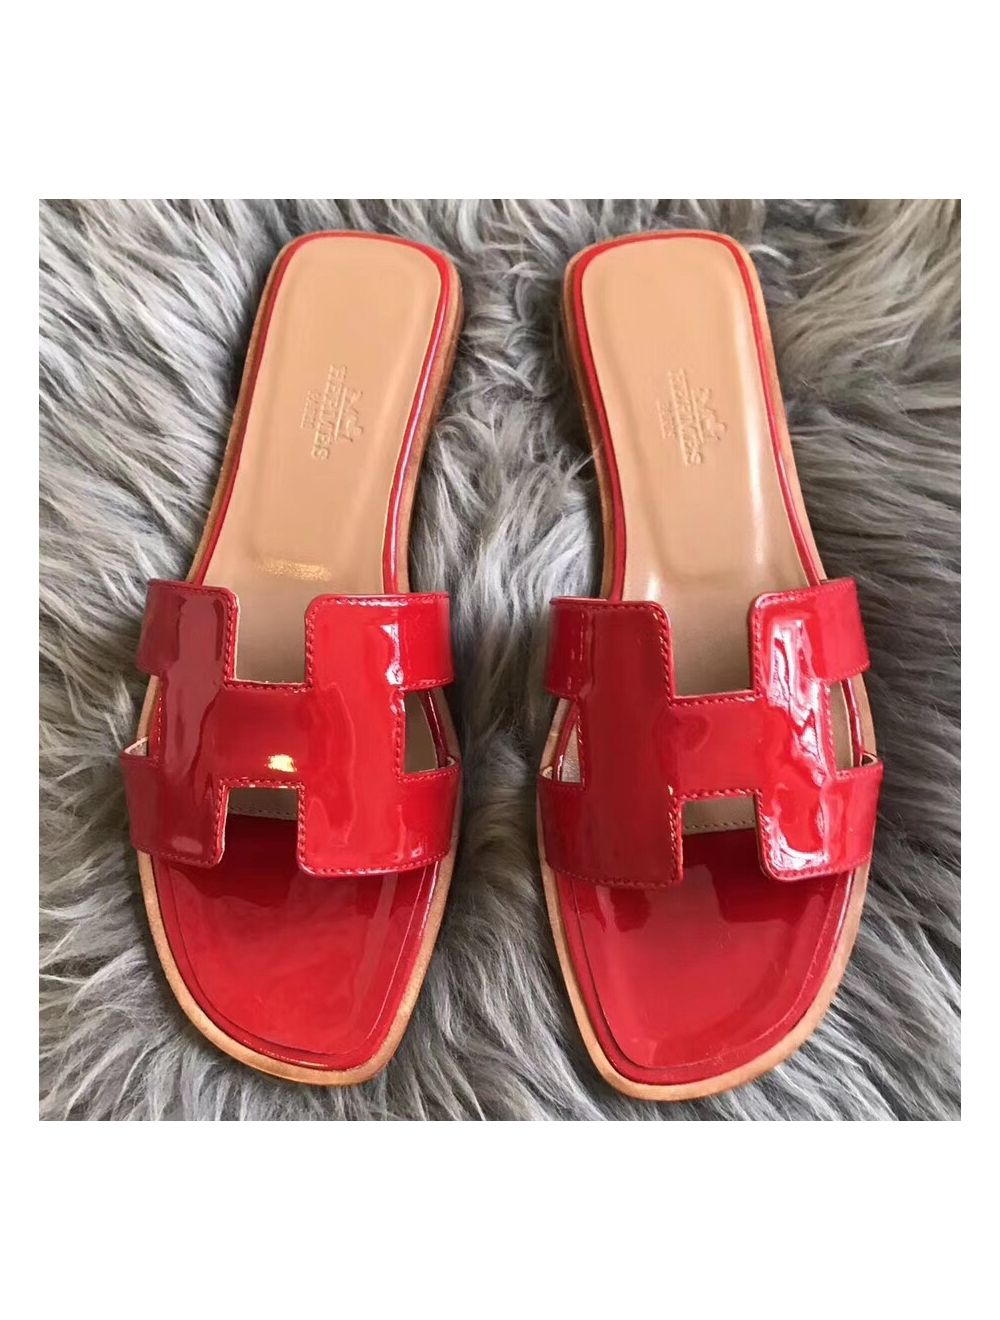 Replica Hermes Oran Sandals In Red Swift Leather